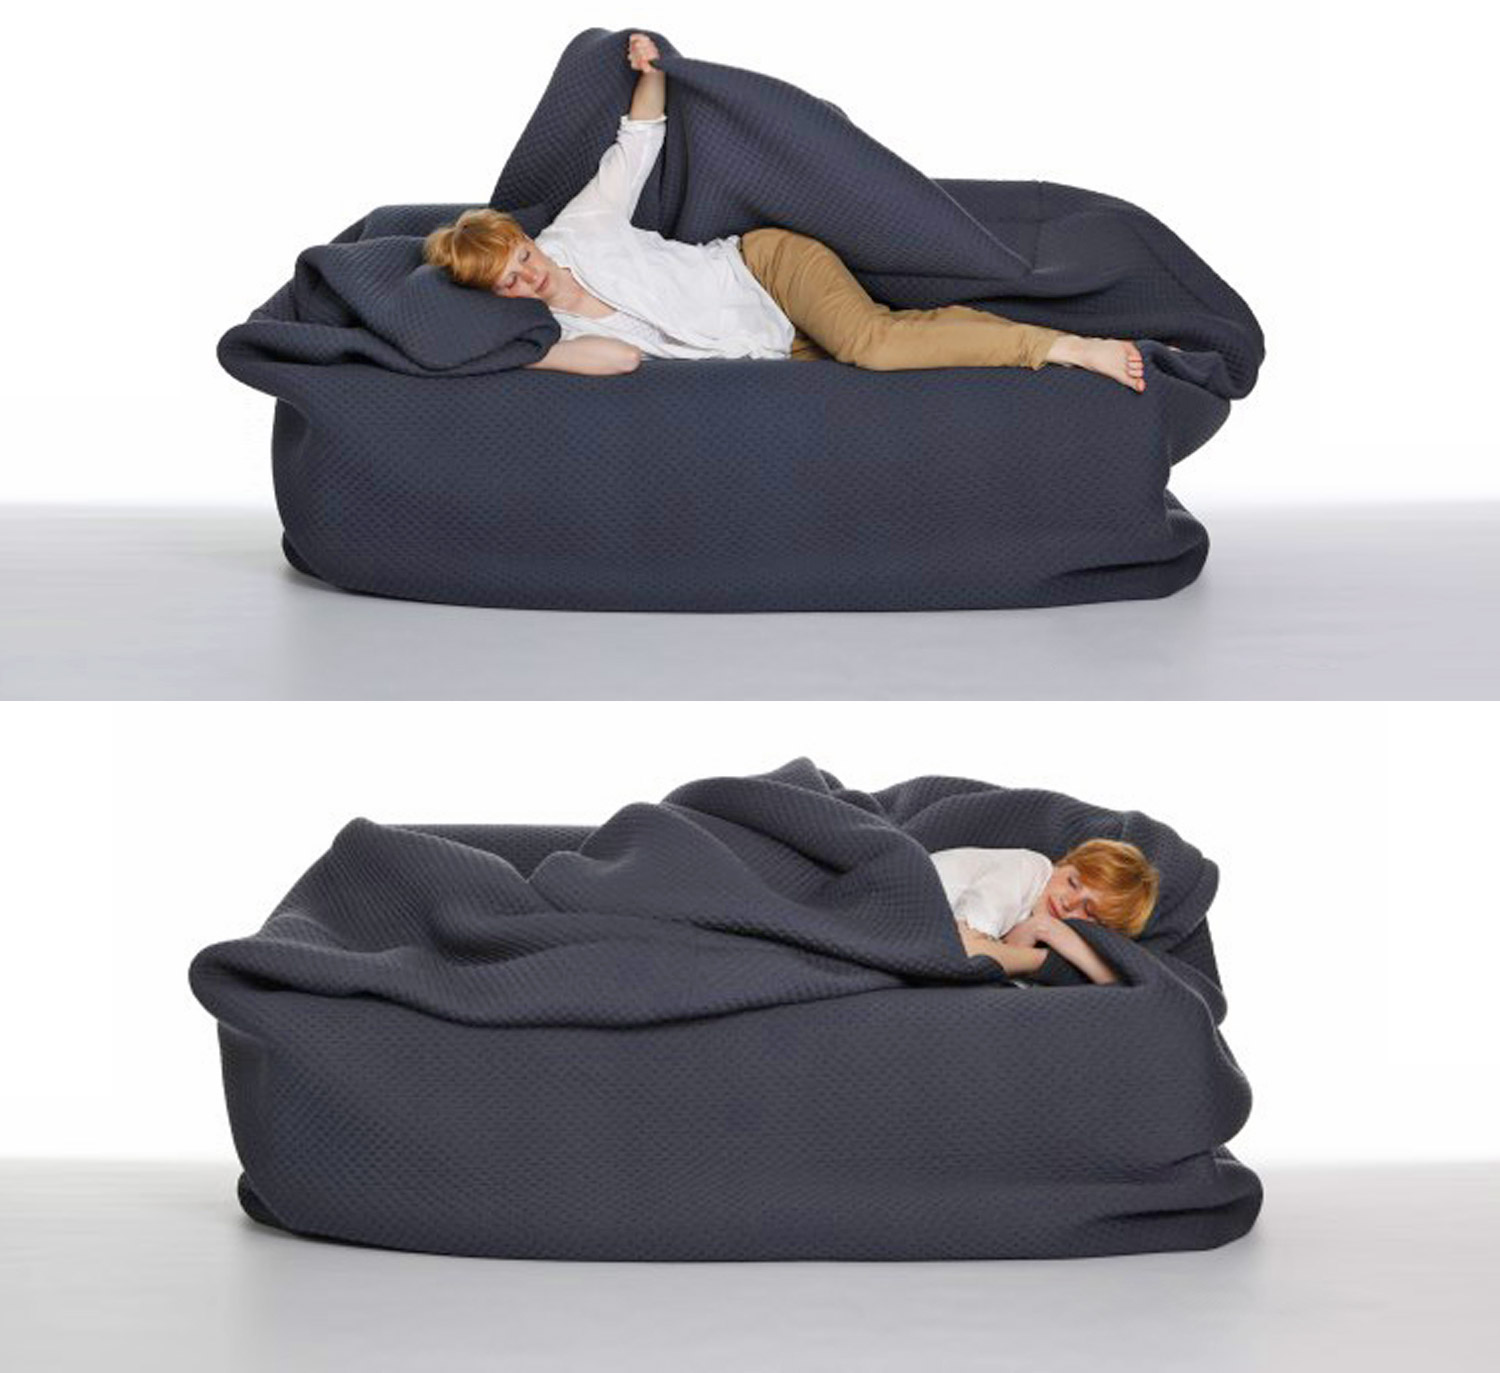 A Bean Bag Bed With Built In Blanket And Pillow 0 